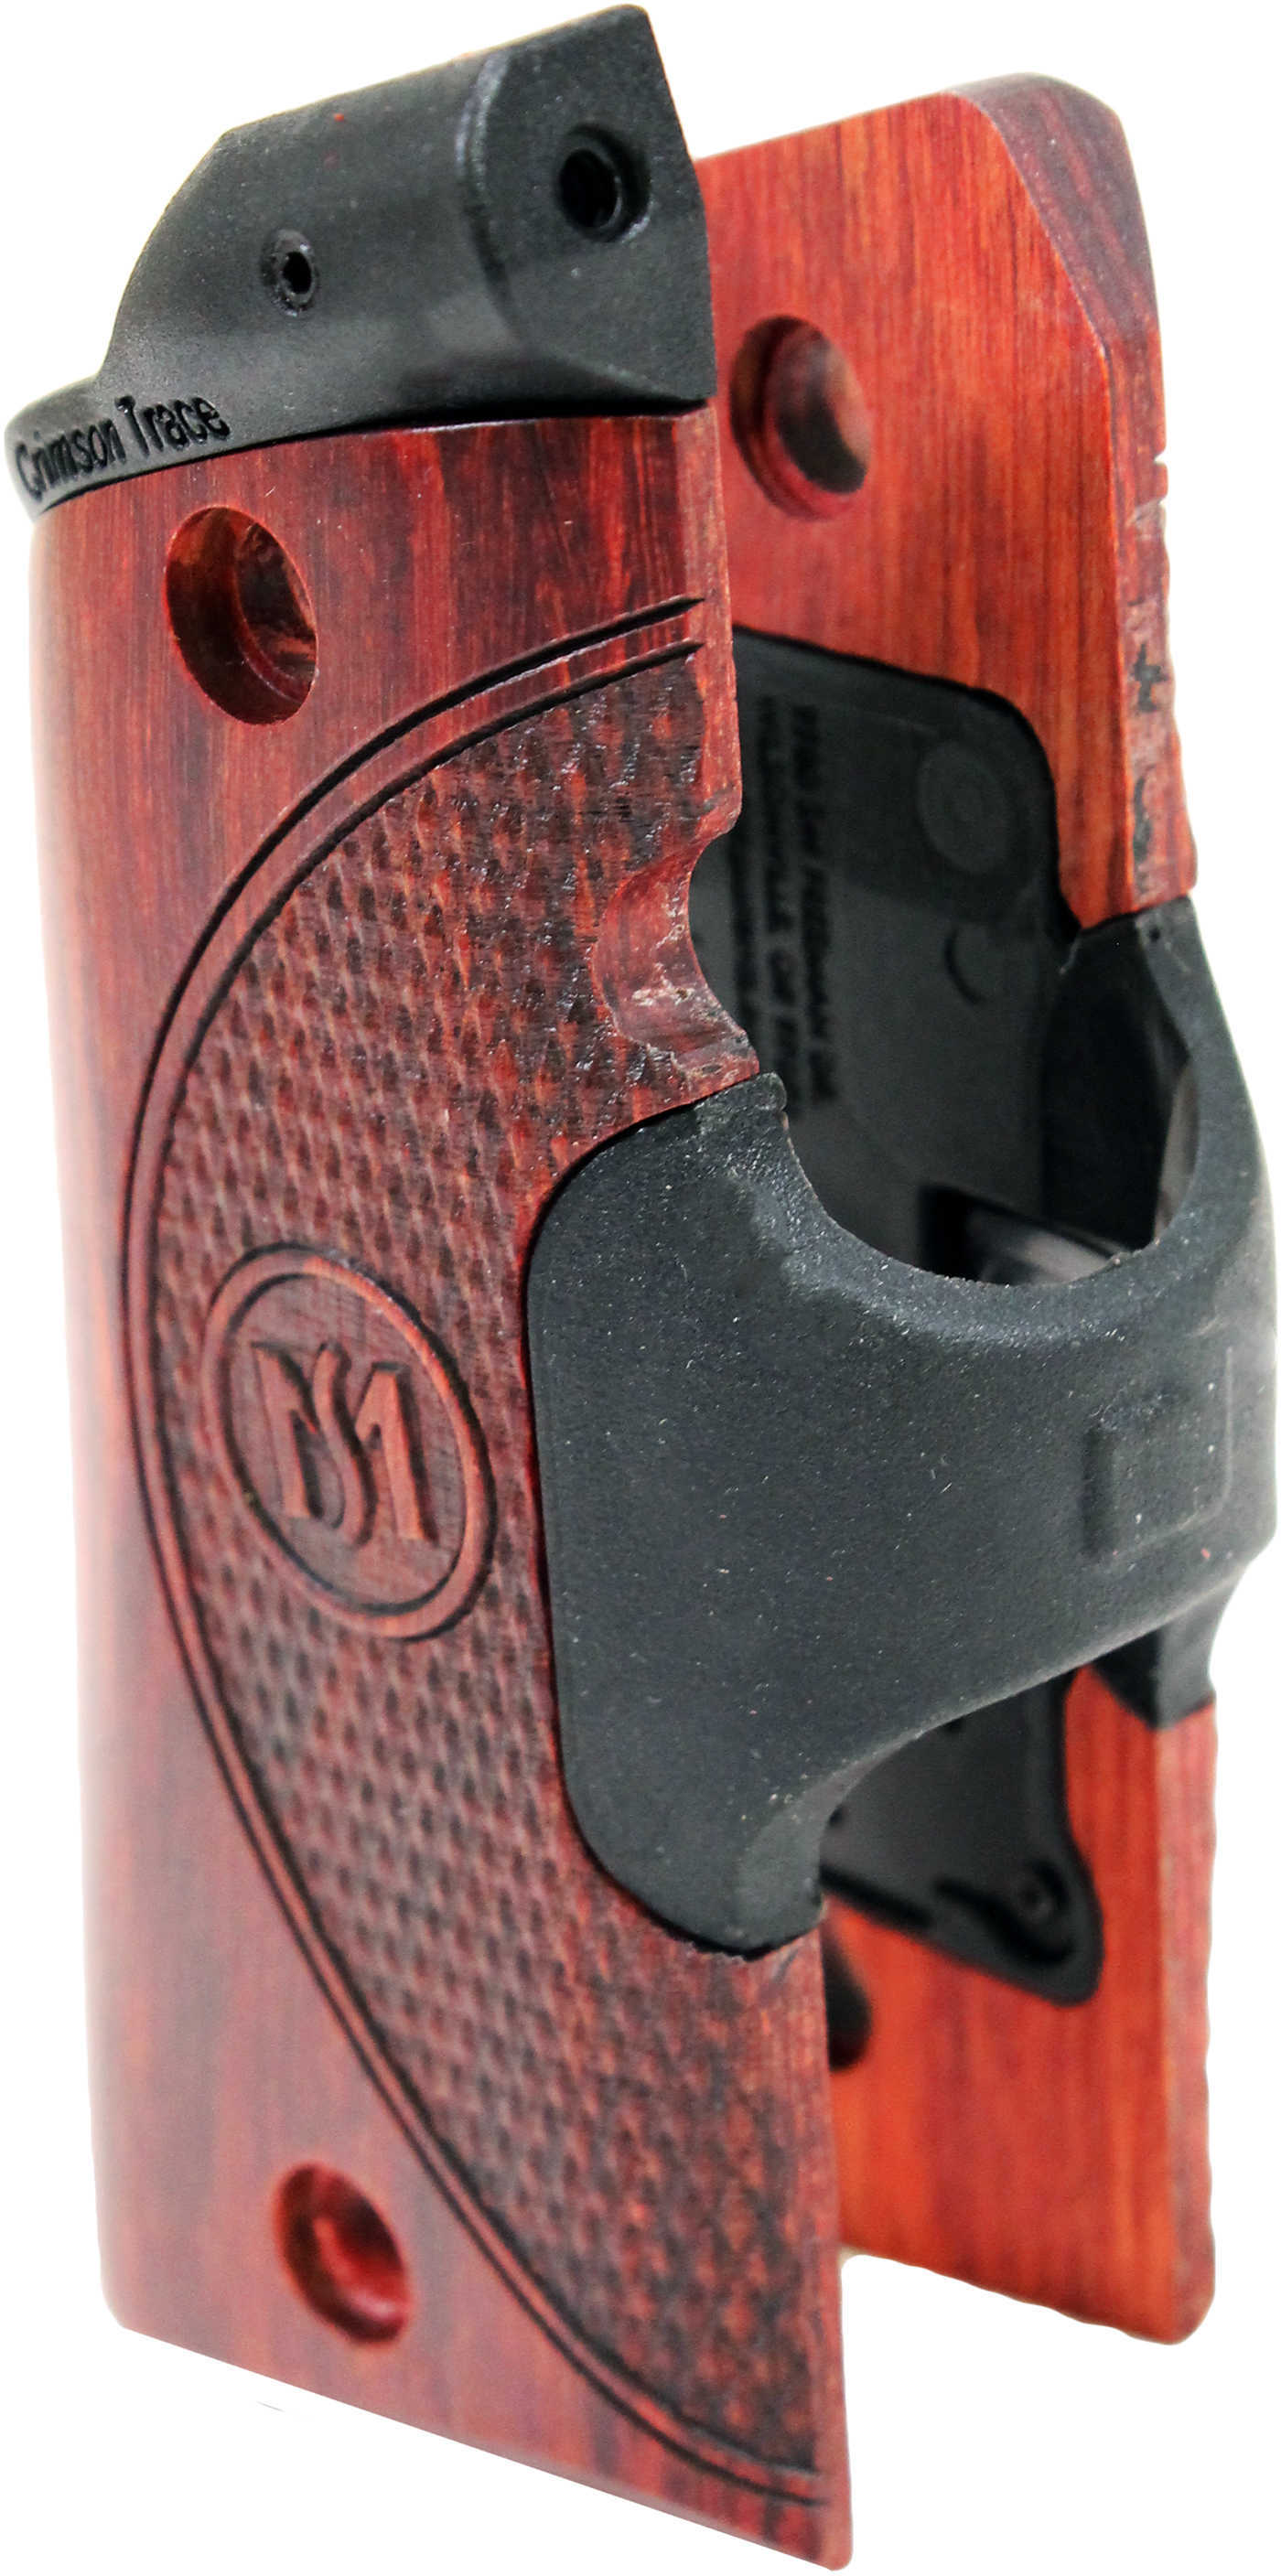 Crimson Trace Lg902g Lasergrips Master Series Green Laser 5mw 532nm Wavelength, Rosewood Grip Replacements, Fits 1911 Co